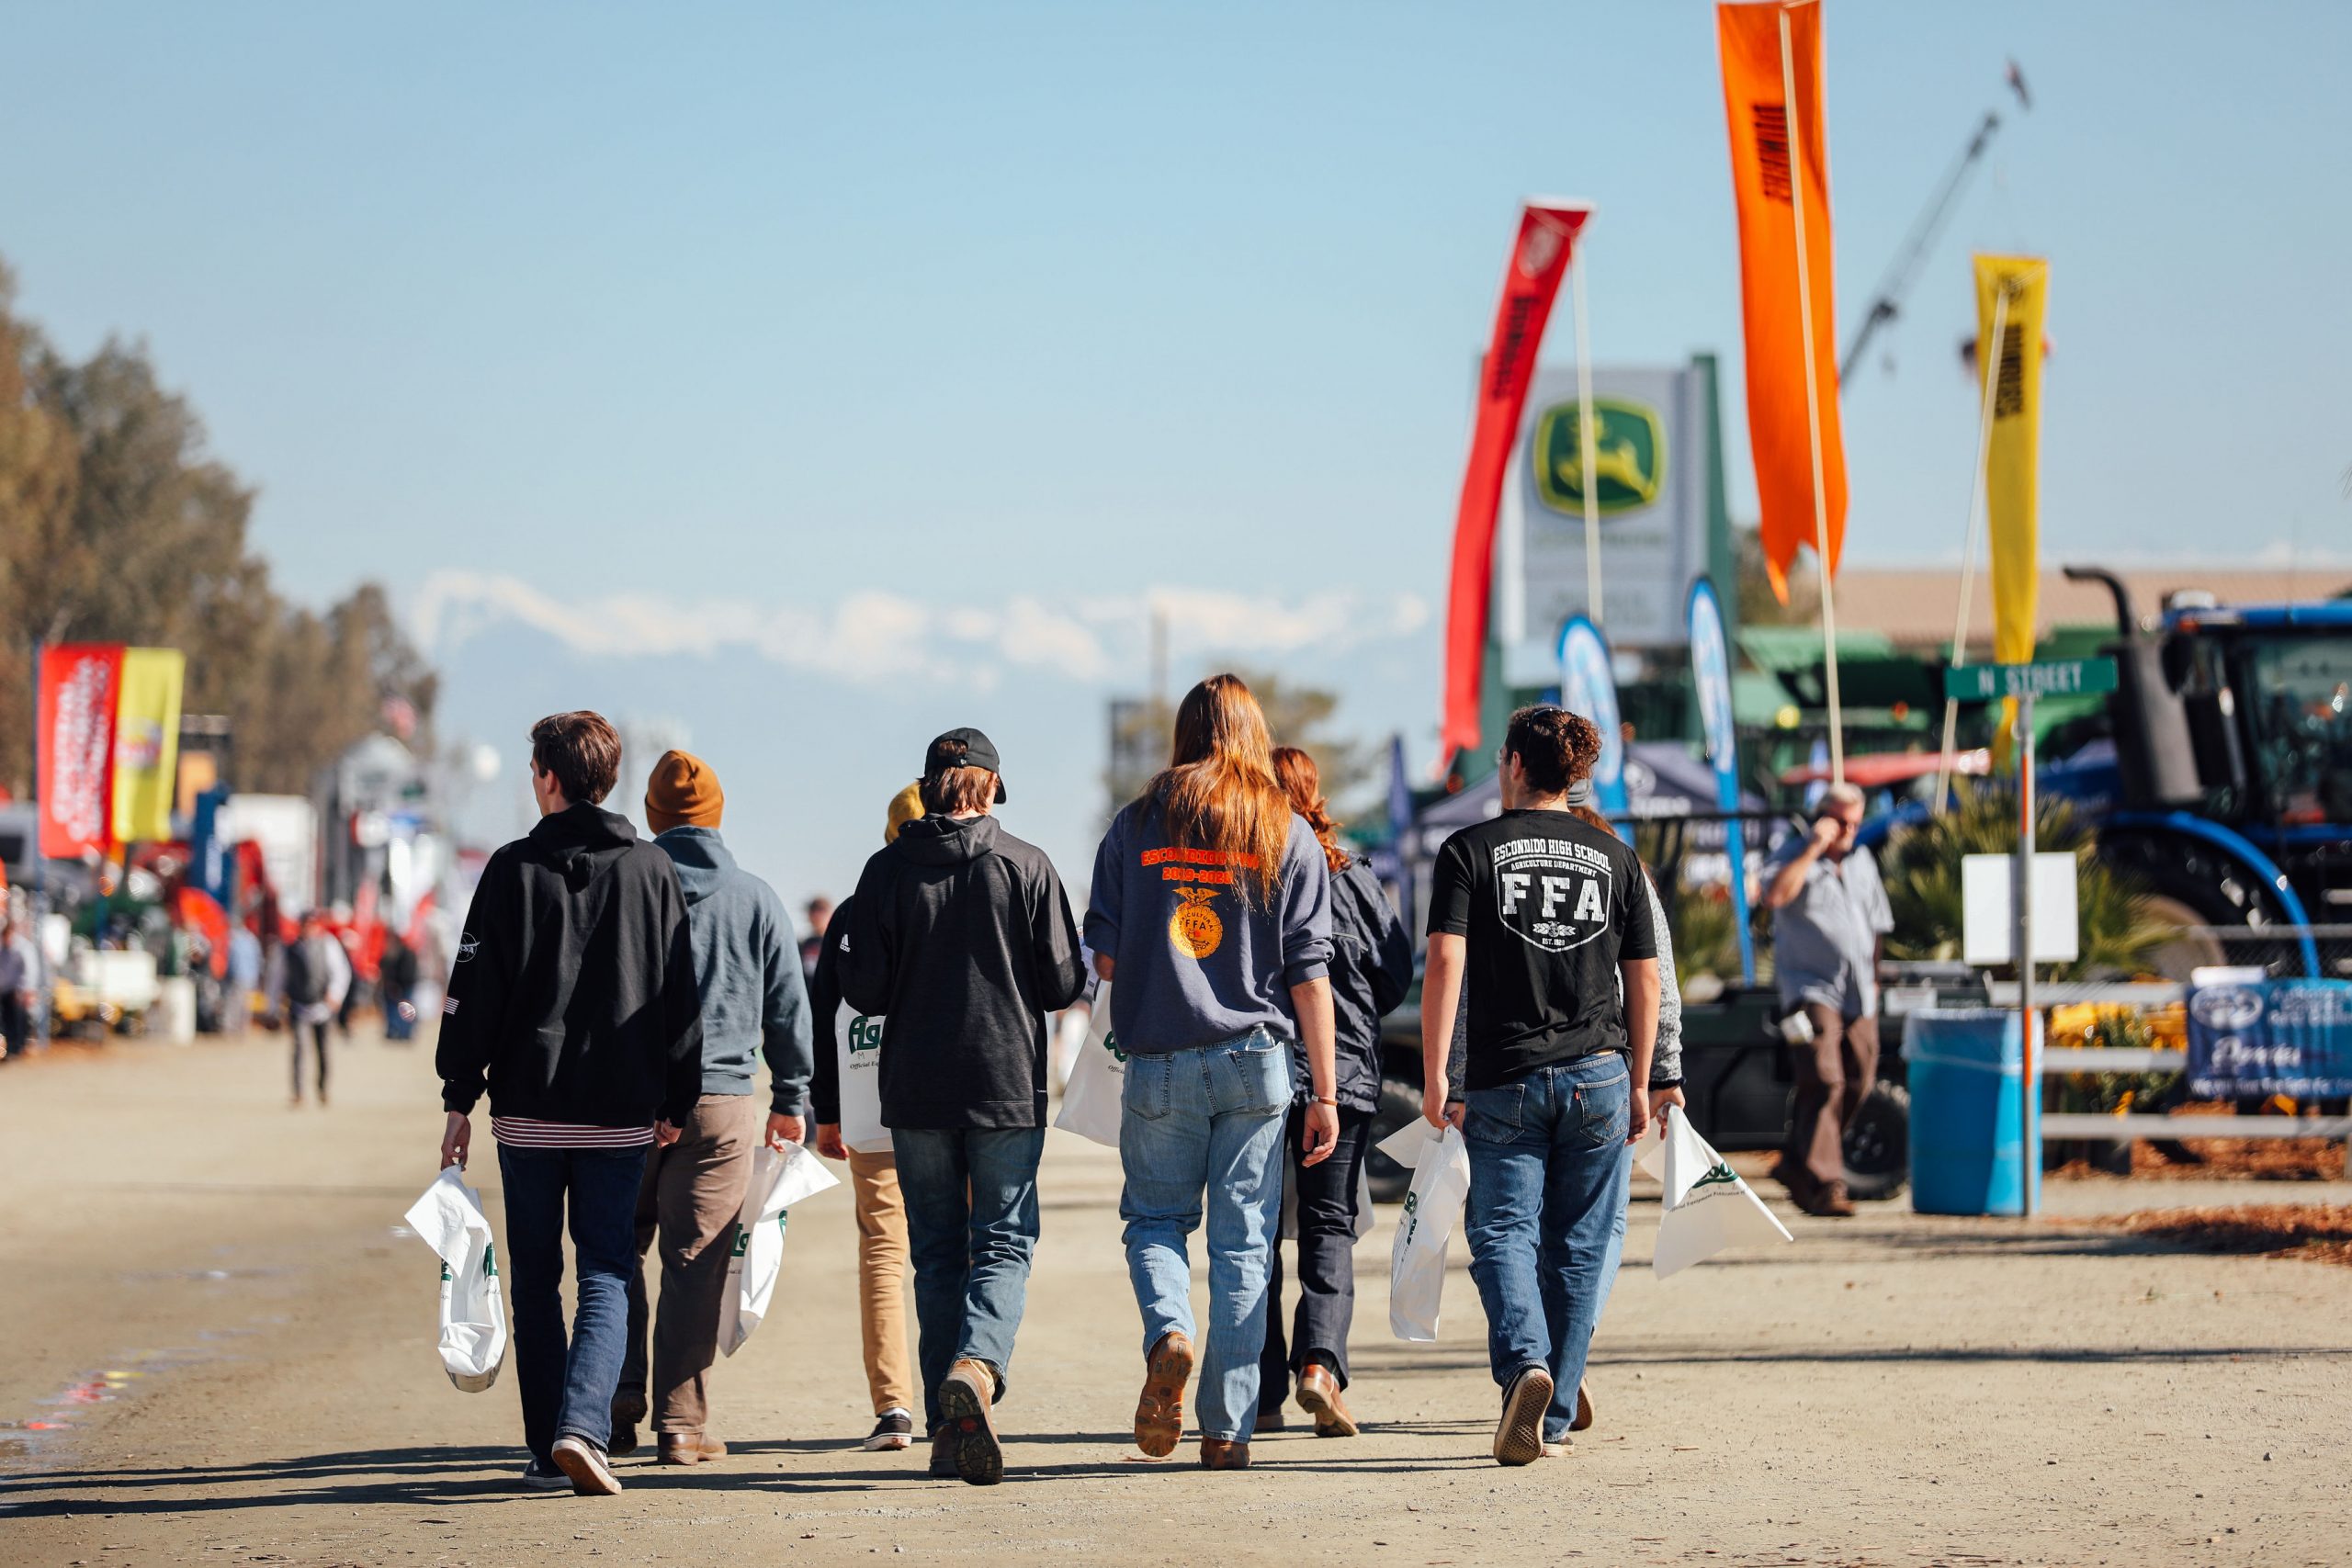 Group of Attendees Walking at World Ag Expo